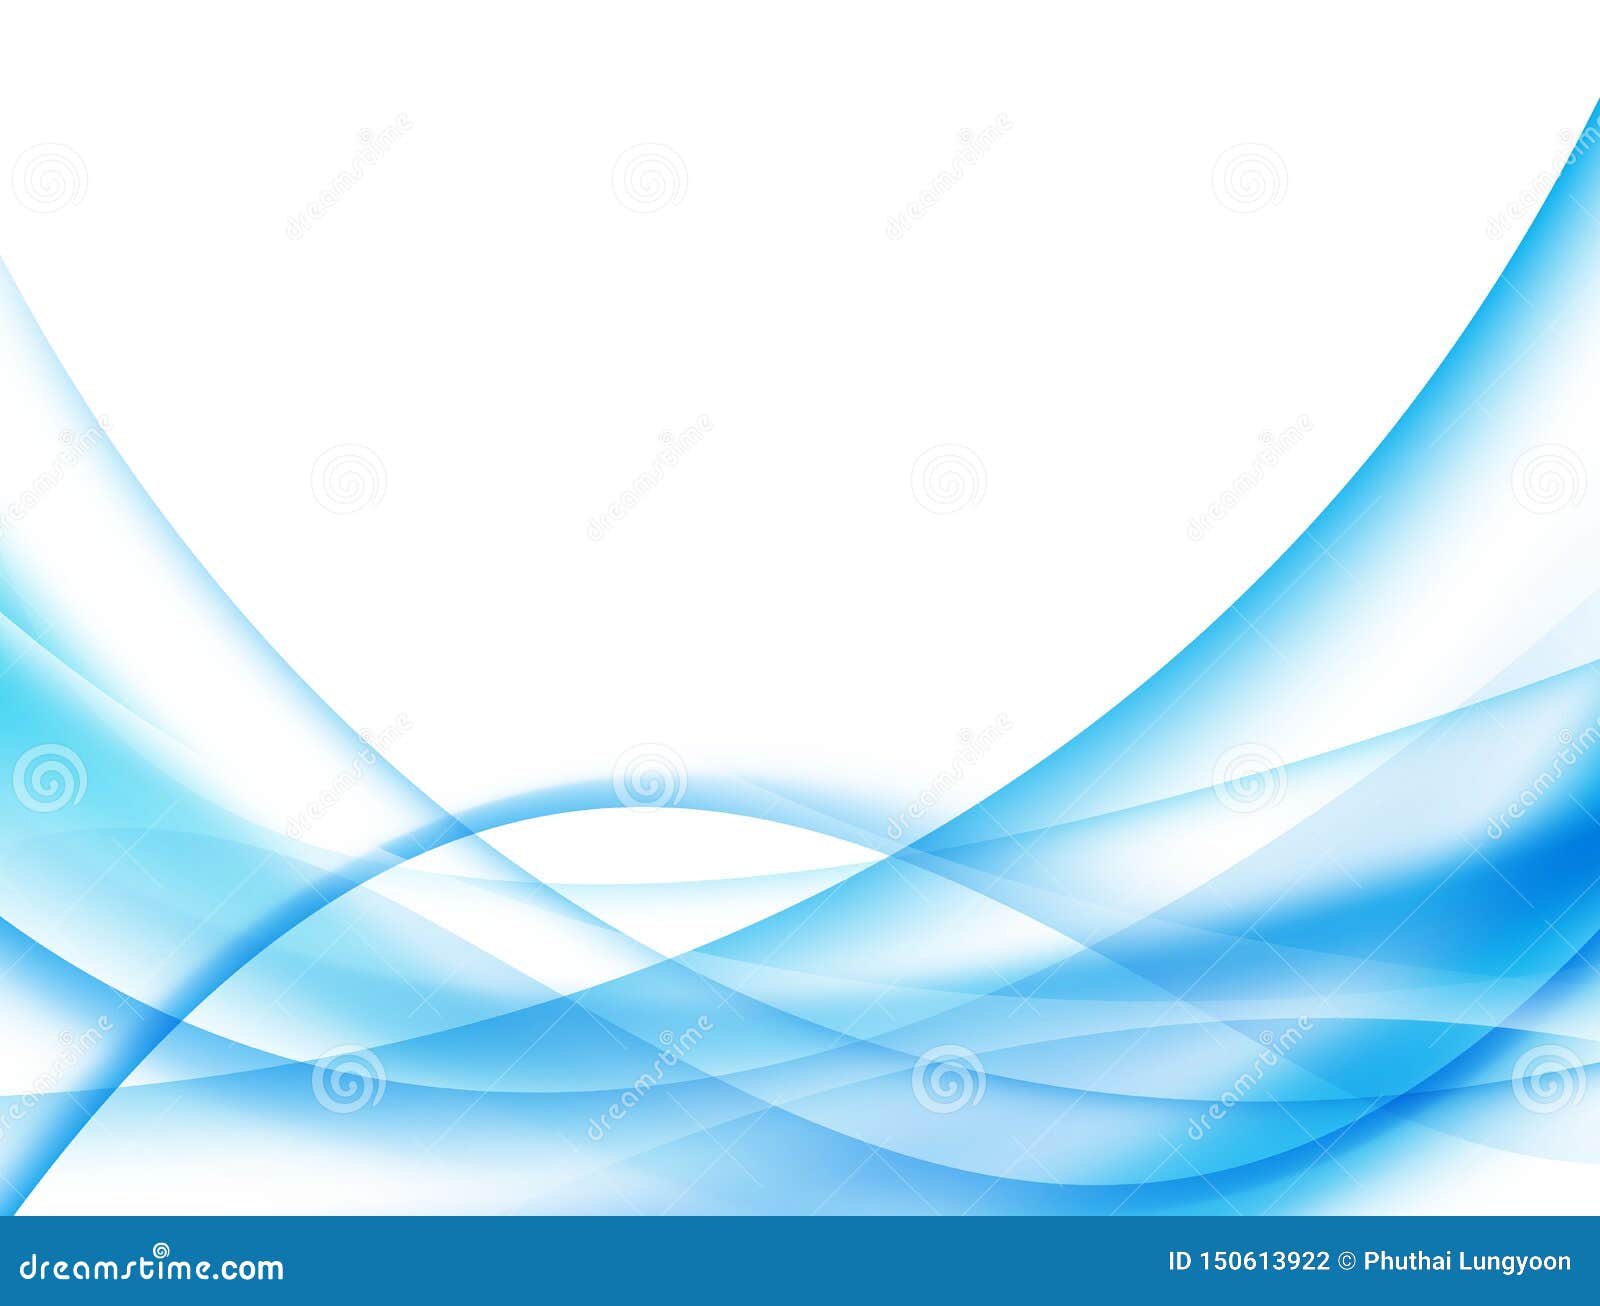 Abstract Blue and White Wave Background Stock Illustration - Illustration  of composition, business: 150613922